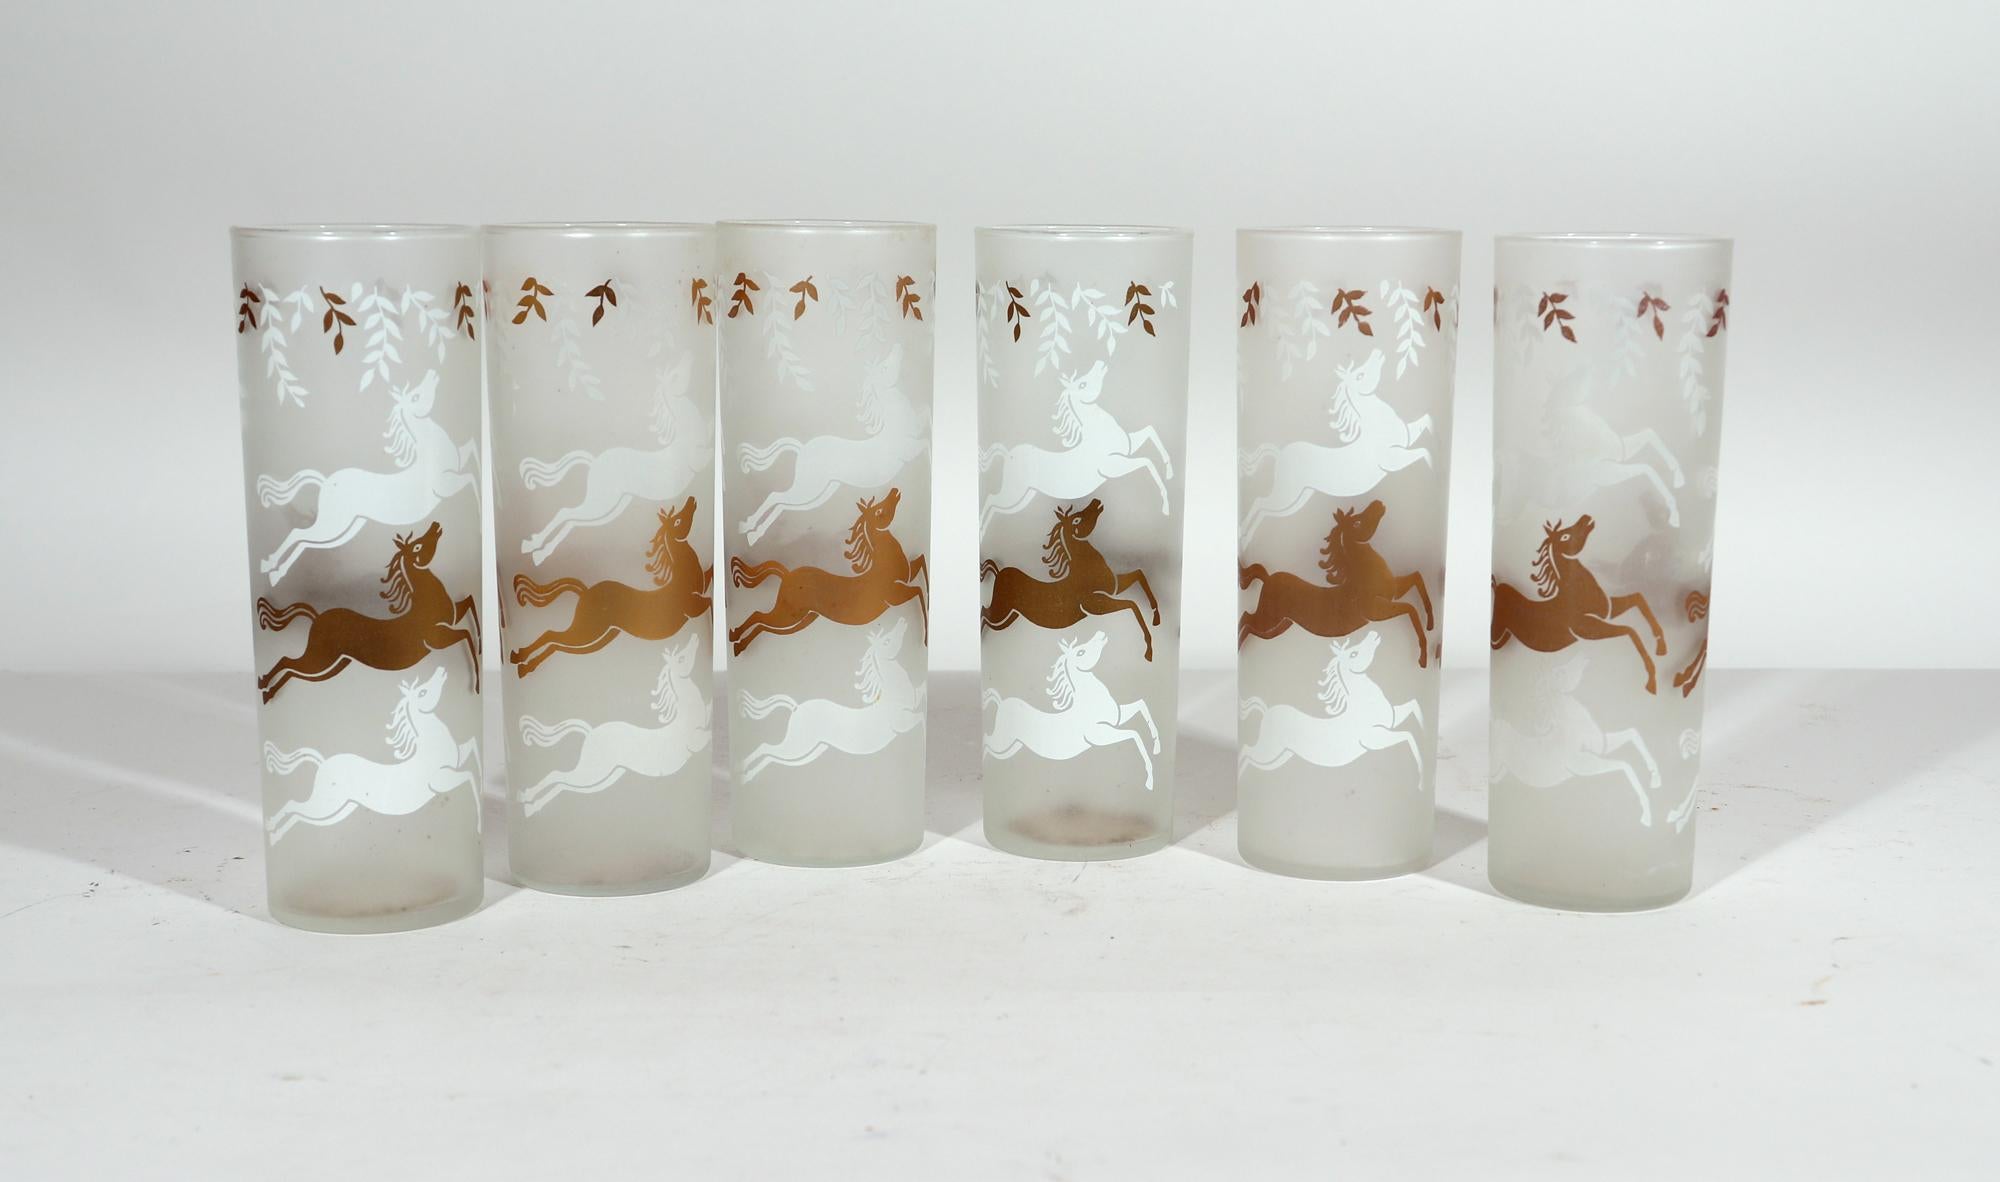 Libbey Cavalcade Galloping Horse Tom Collins cocktail glasses
Mid-Century Modern glasses- set of twelve,
The 1950s

Twelve (12) Libbey Tom Collins or Highball frosted glasses decorated on both sides with galloping horses- two white horses and a